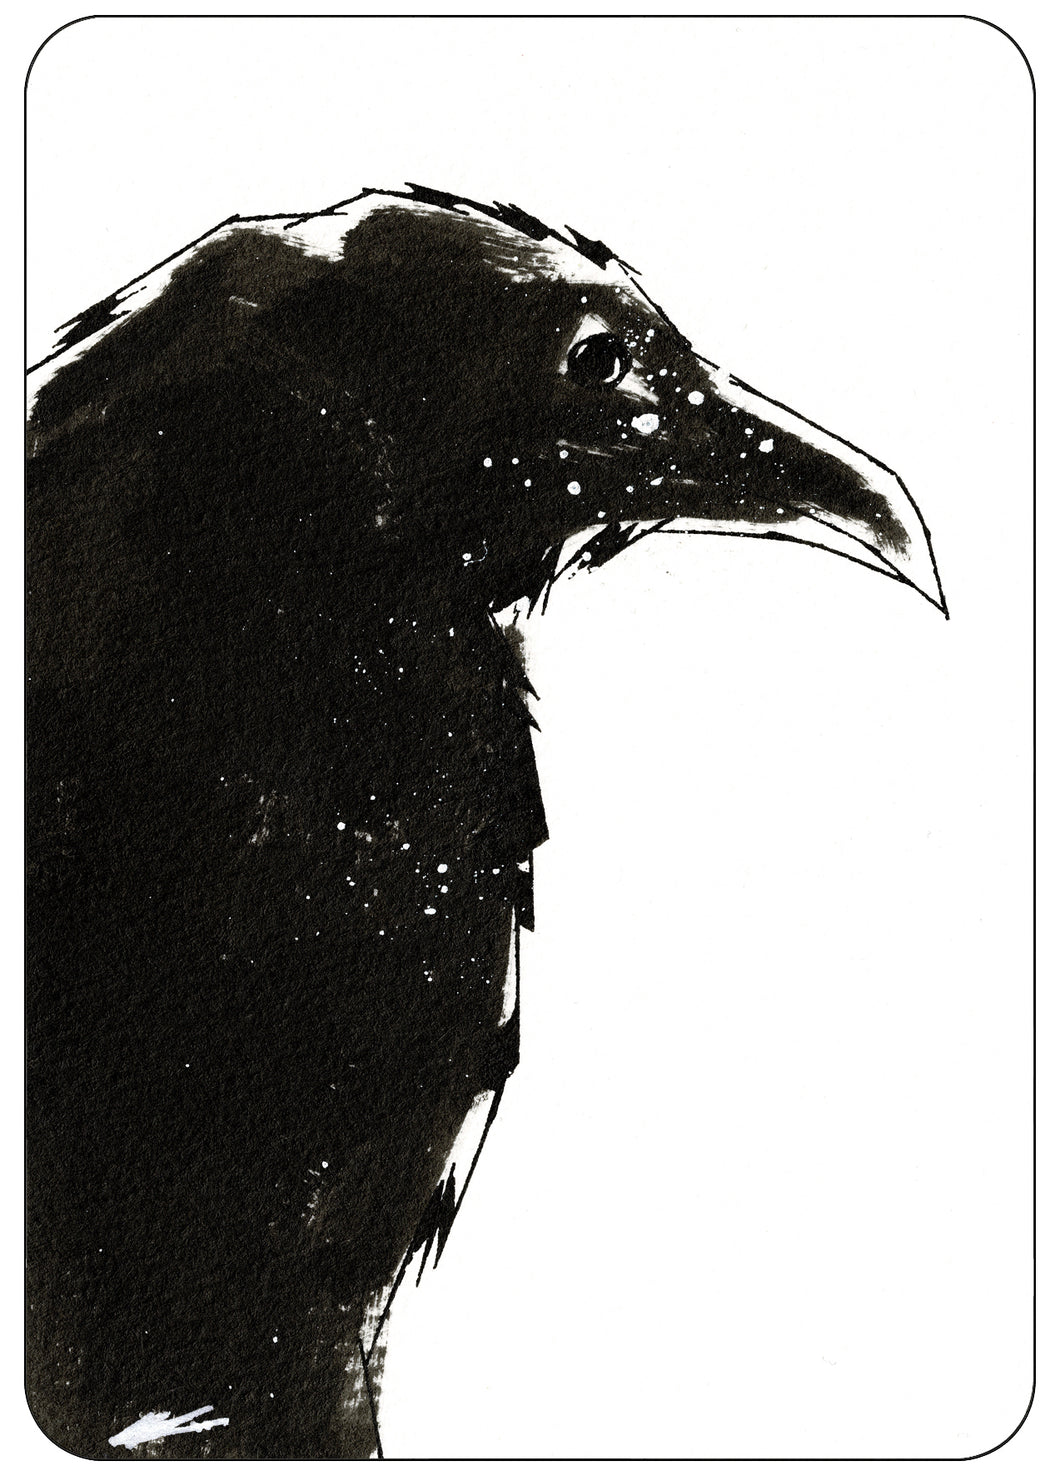 MARCH CROW